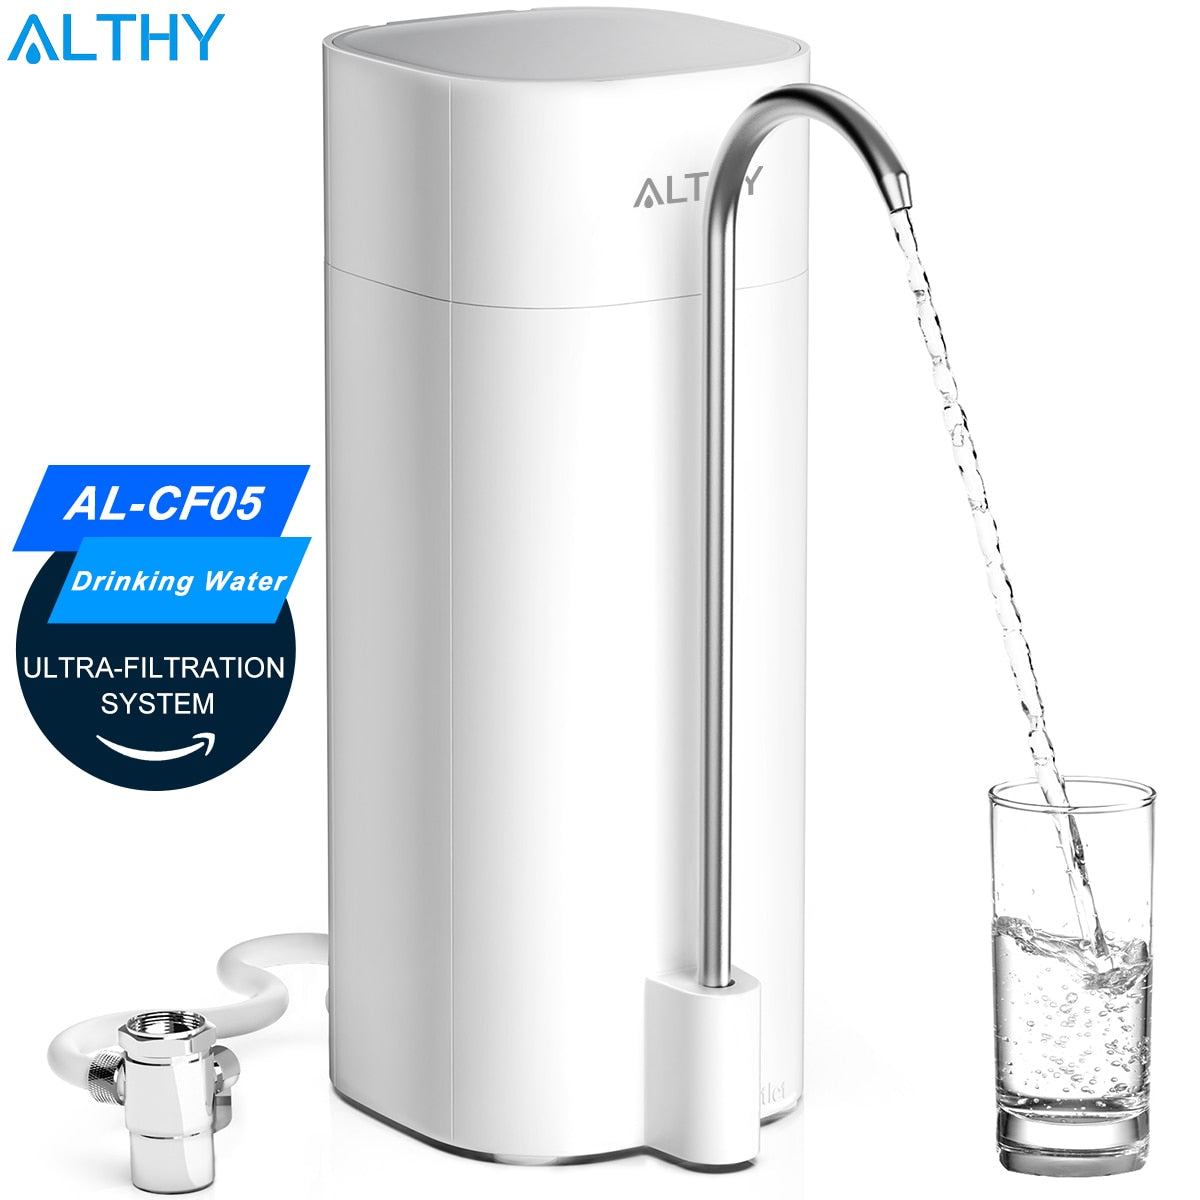 ALTHY Countertop Faucet Drinking Water Filter Purifier Ultrafiltration System, Reduces 99% bacteria, Chlorine, Heavy Metals.